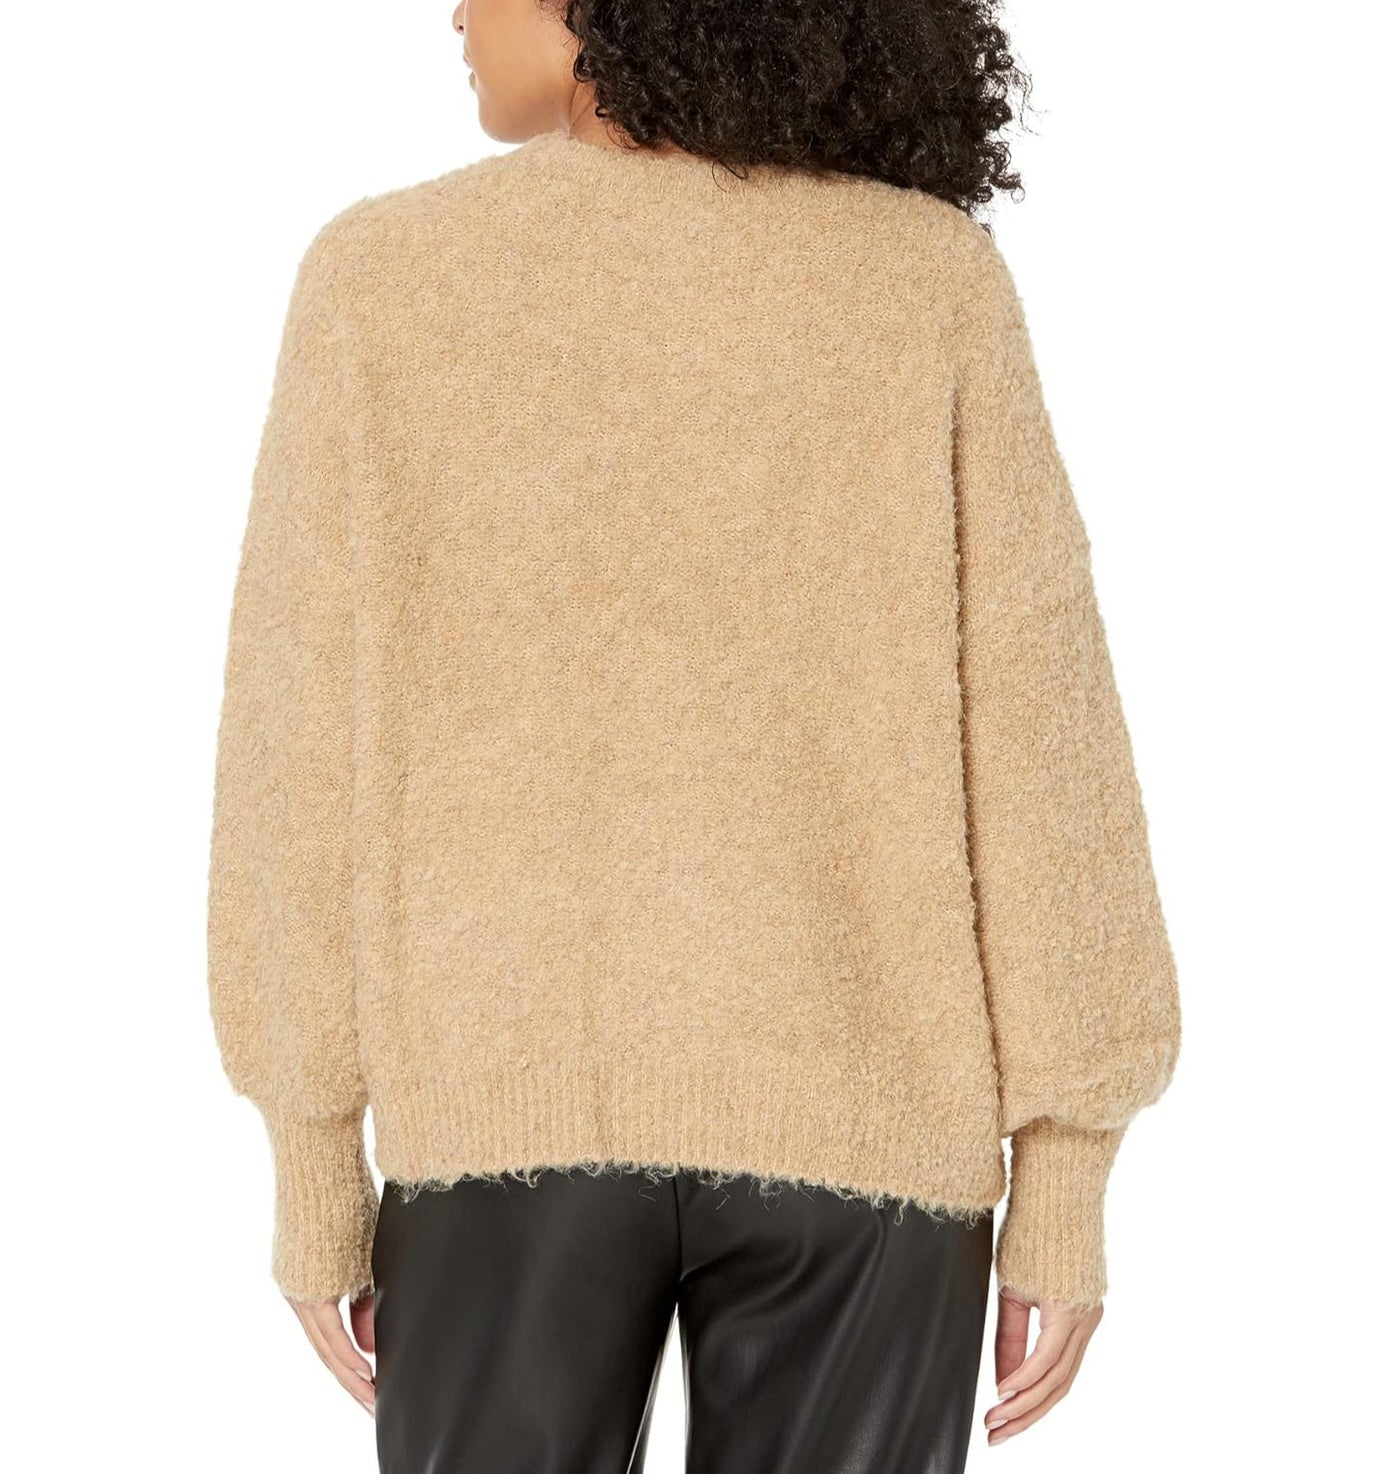 Vince Camuto Bocle Sweater with Chest Pocket